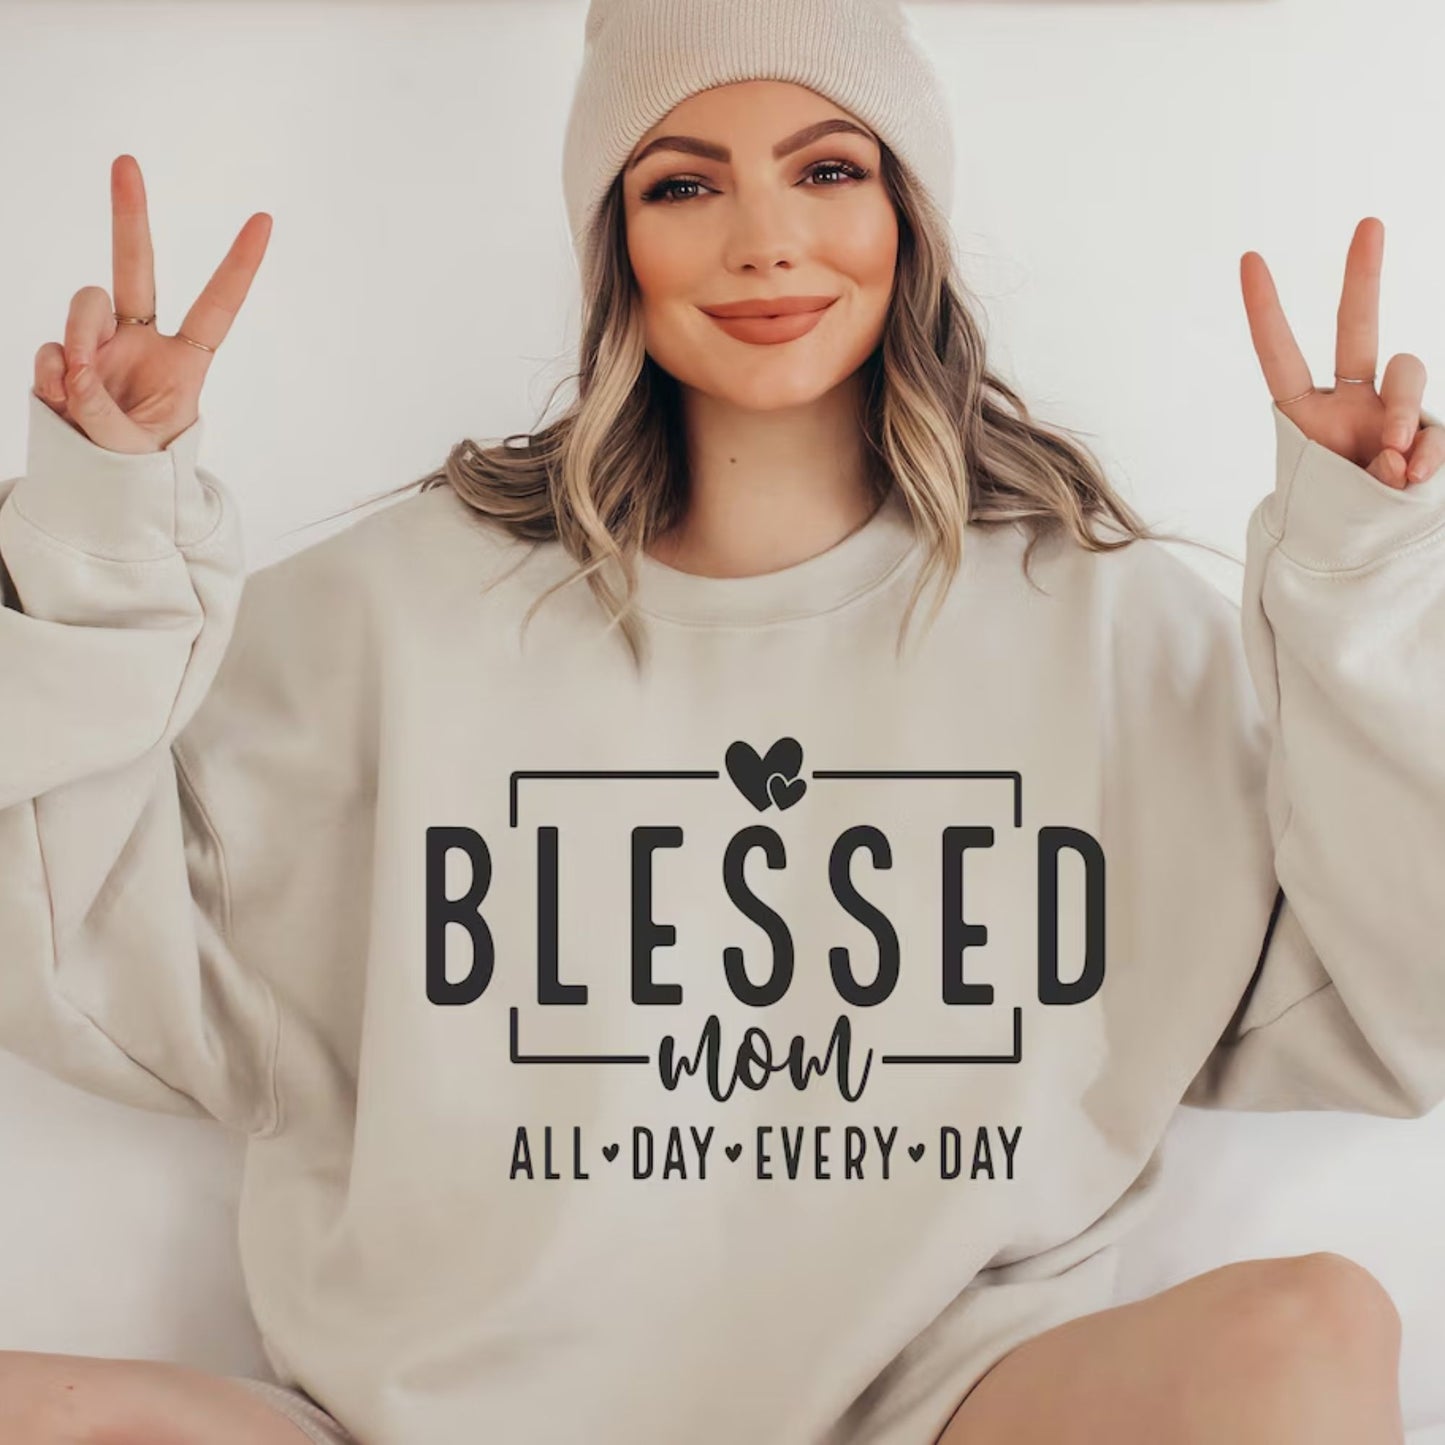 Blessed Mom: All Day Every Day Shirt, Gift for Mom